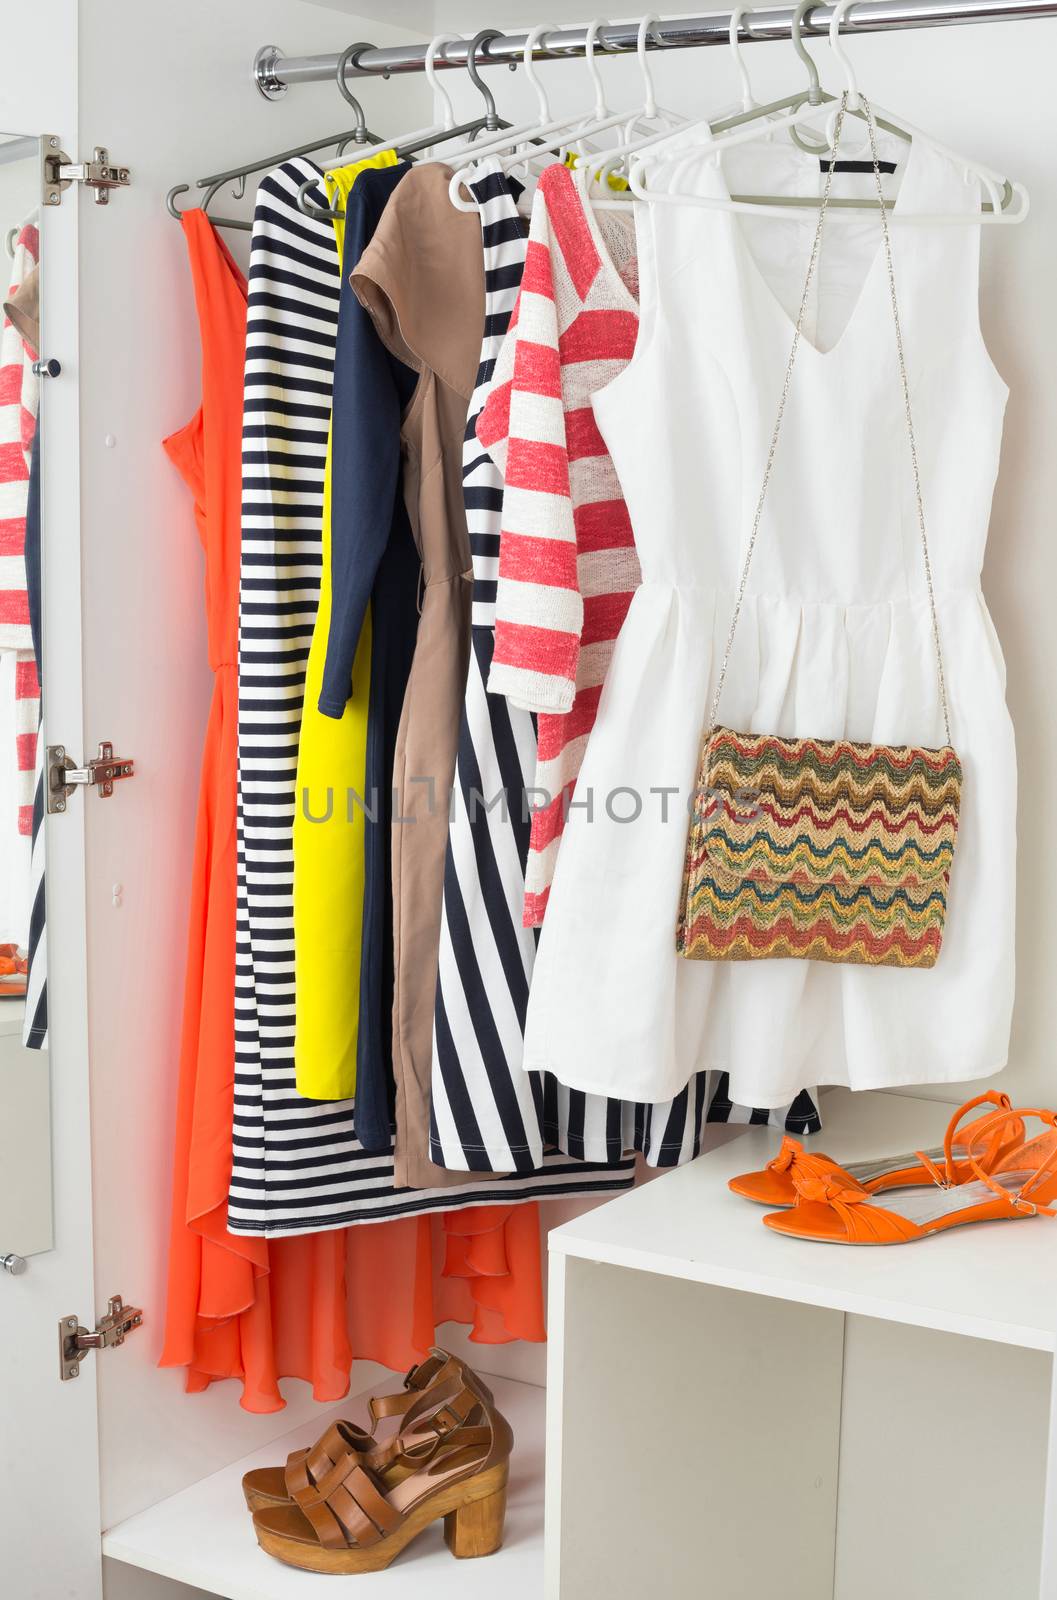 Set of bright colorful female fashion clothes on the hangers for spring and summer wardrobe, handbag, sandals in white cabinet, vertical